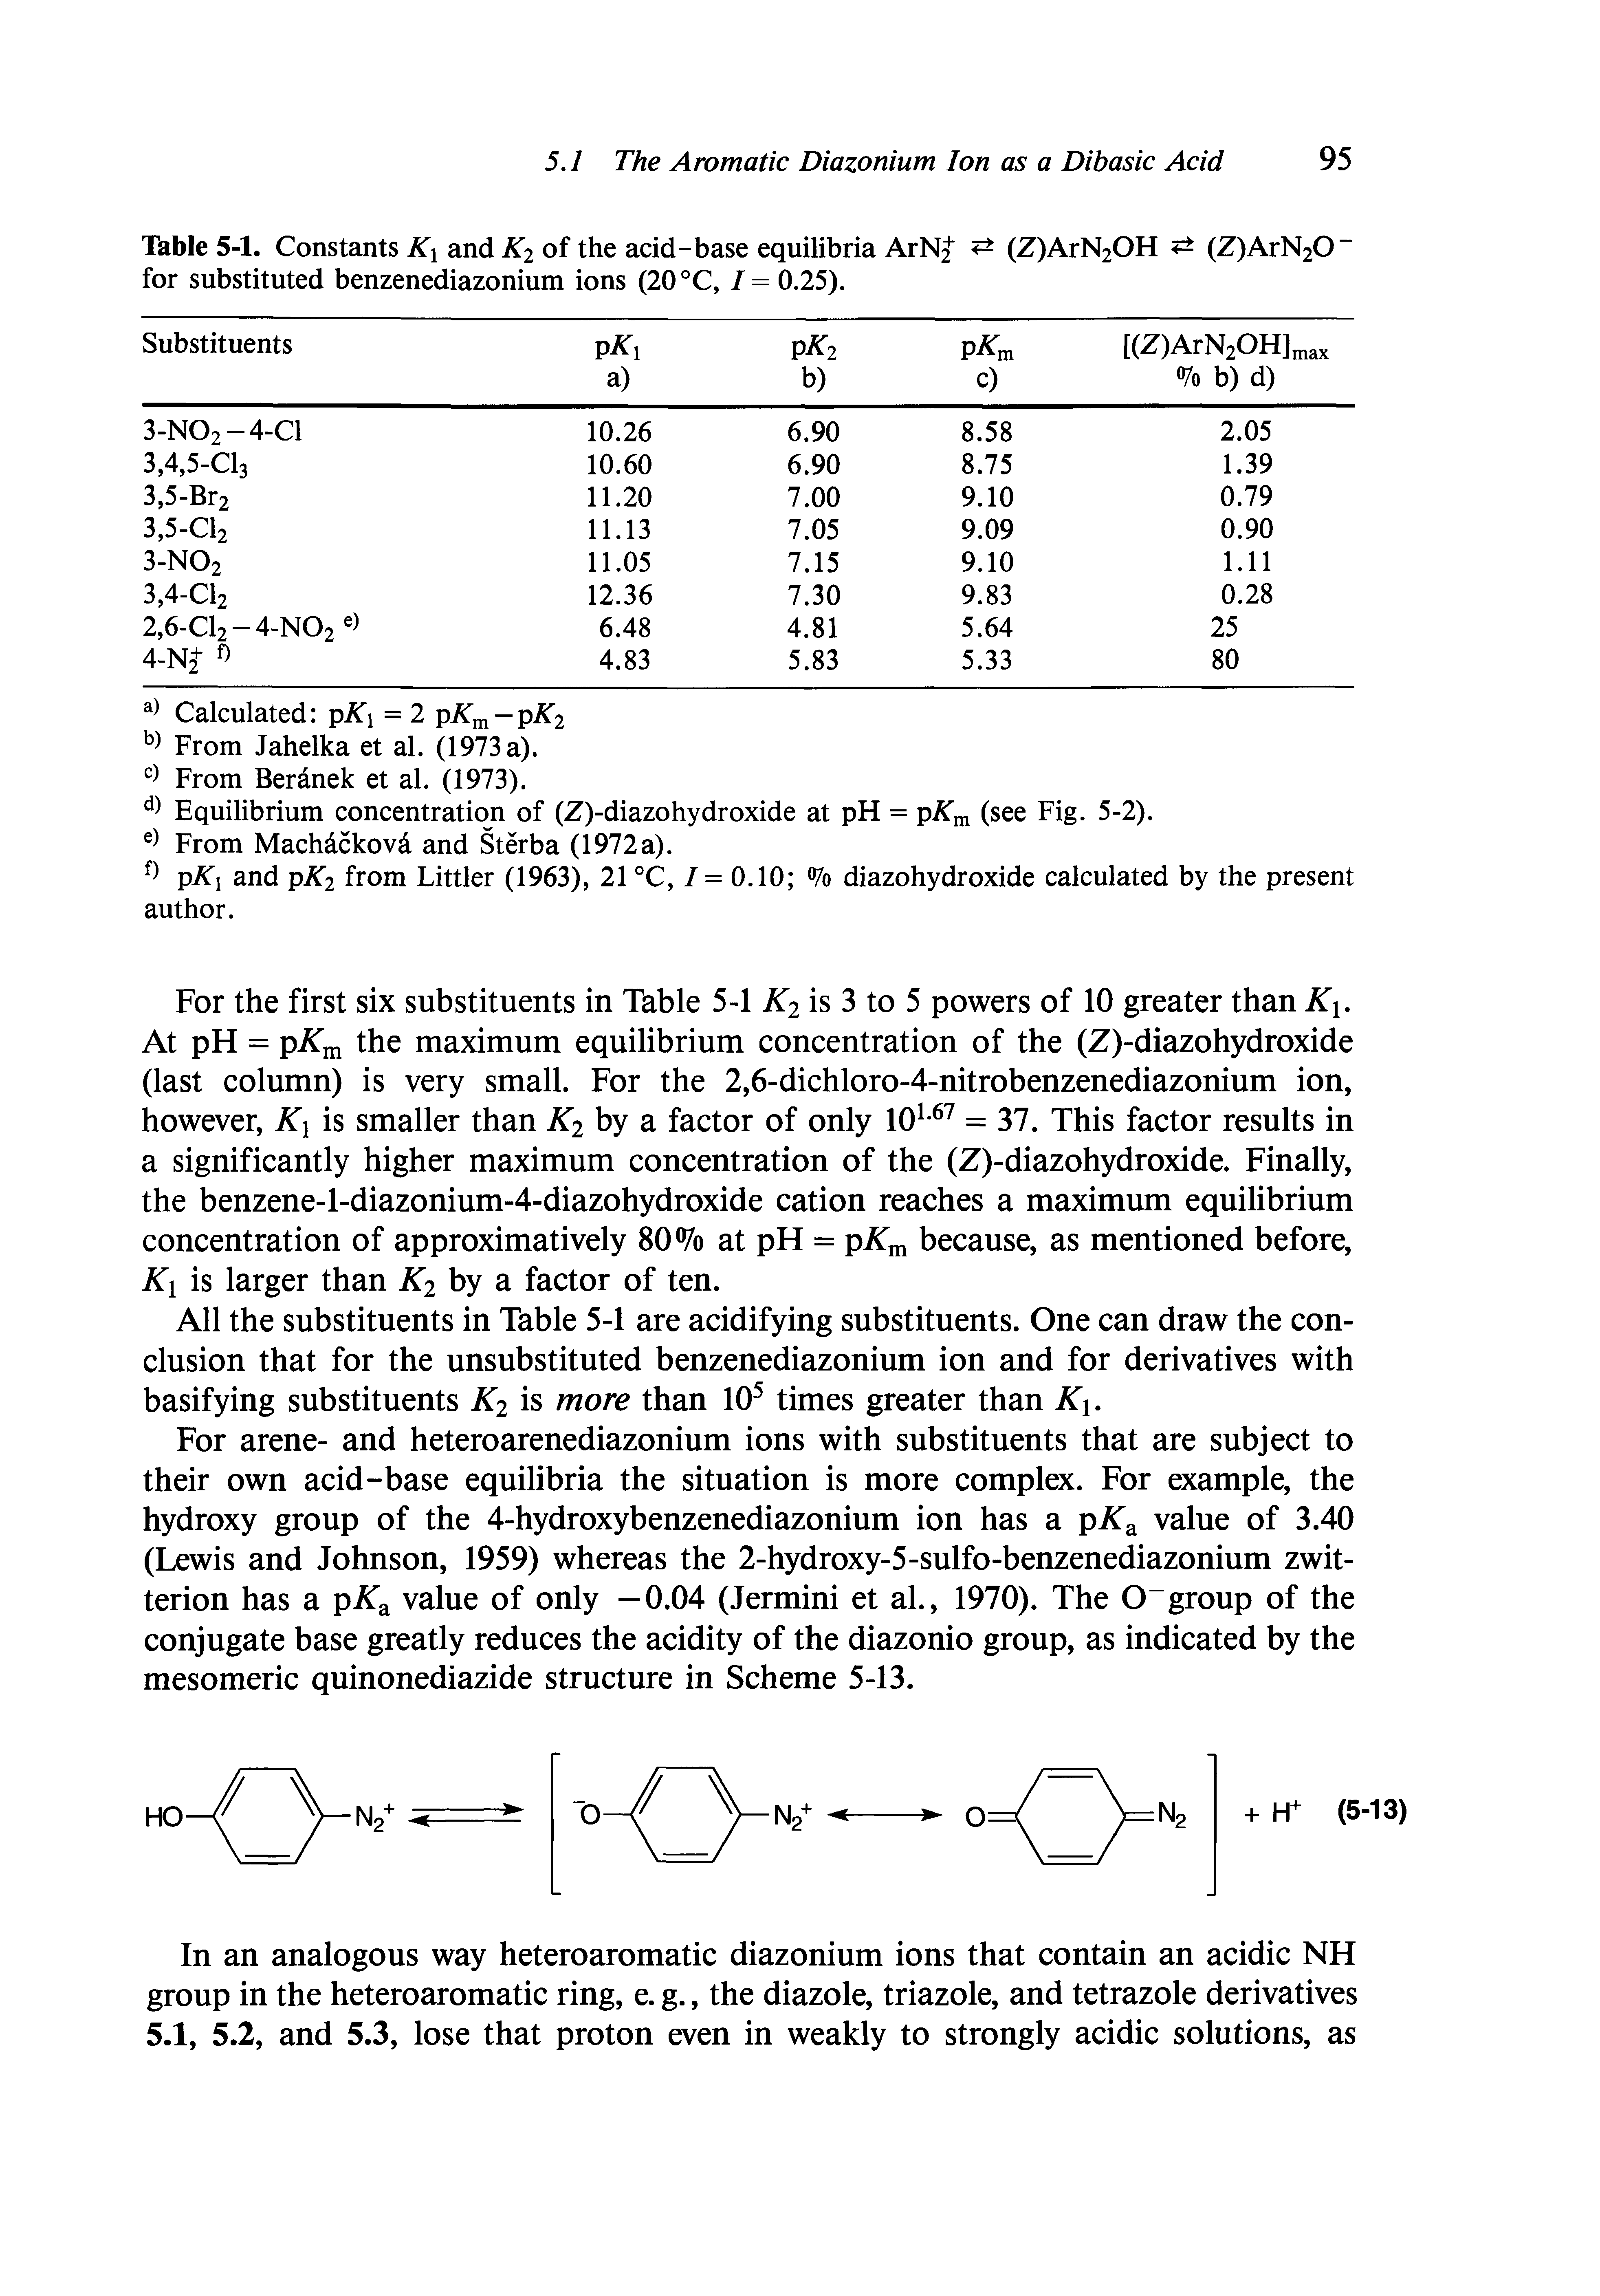 Table 5-1. Constants Kx and K2 of the acid-base equilibria ArNJ (Z)ArN2OH (Z)ArN20 for substituted benzenediazonium ions (20 °C, / = 0.25).